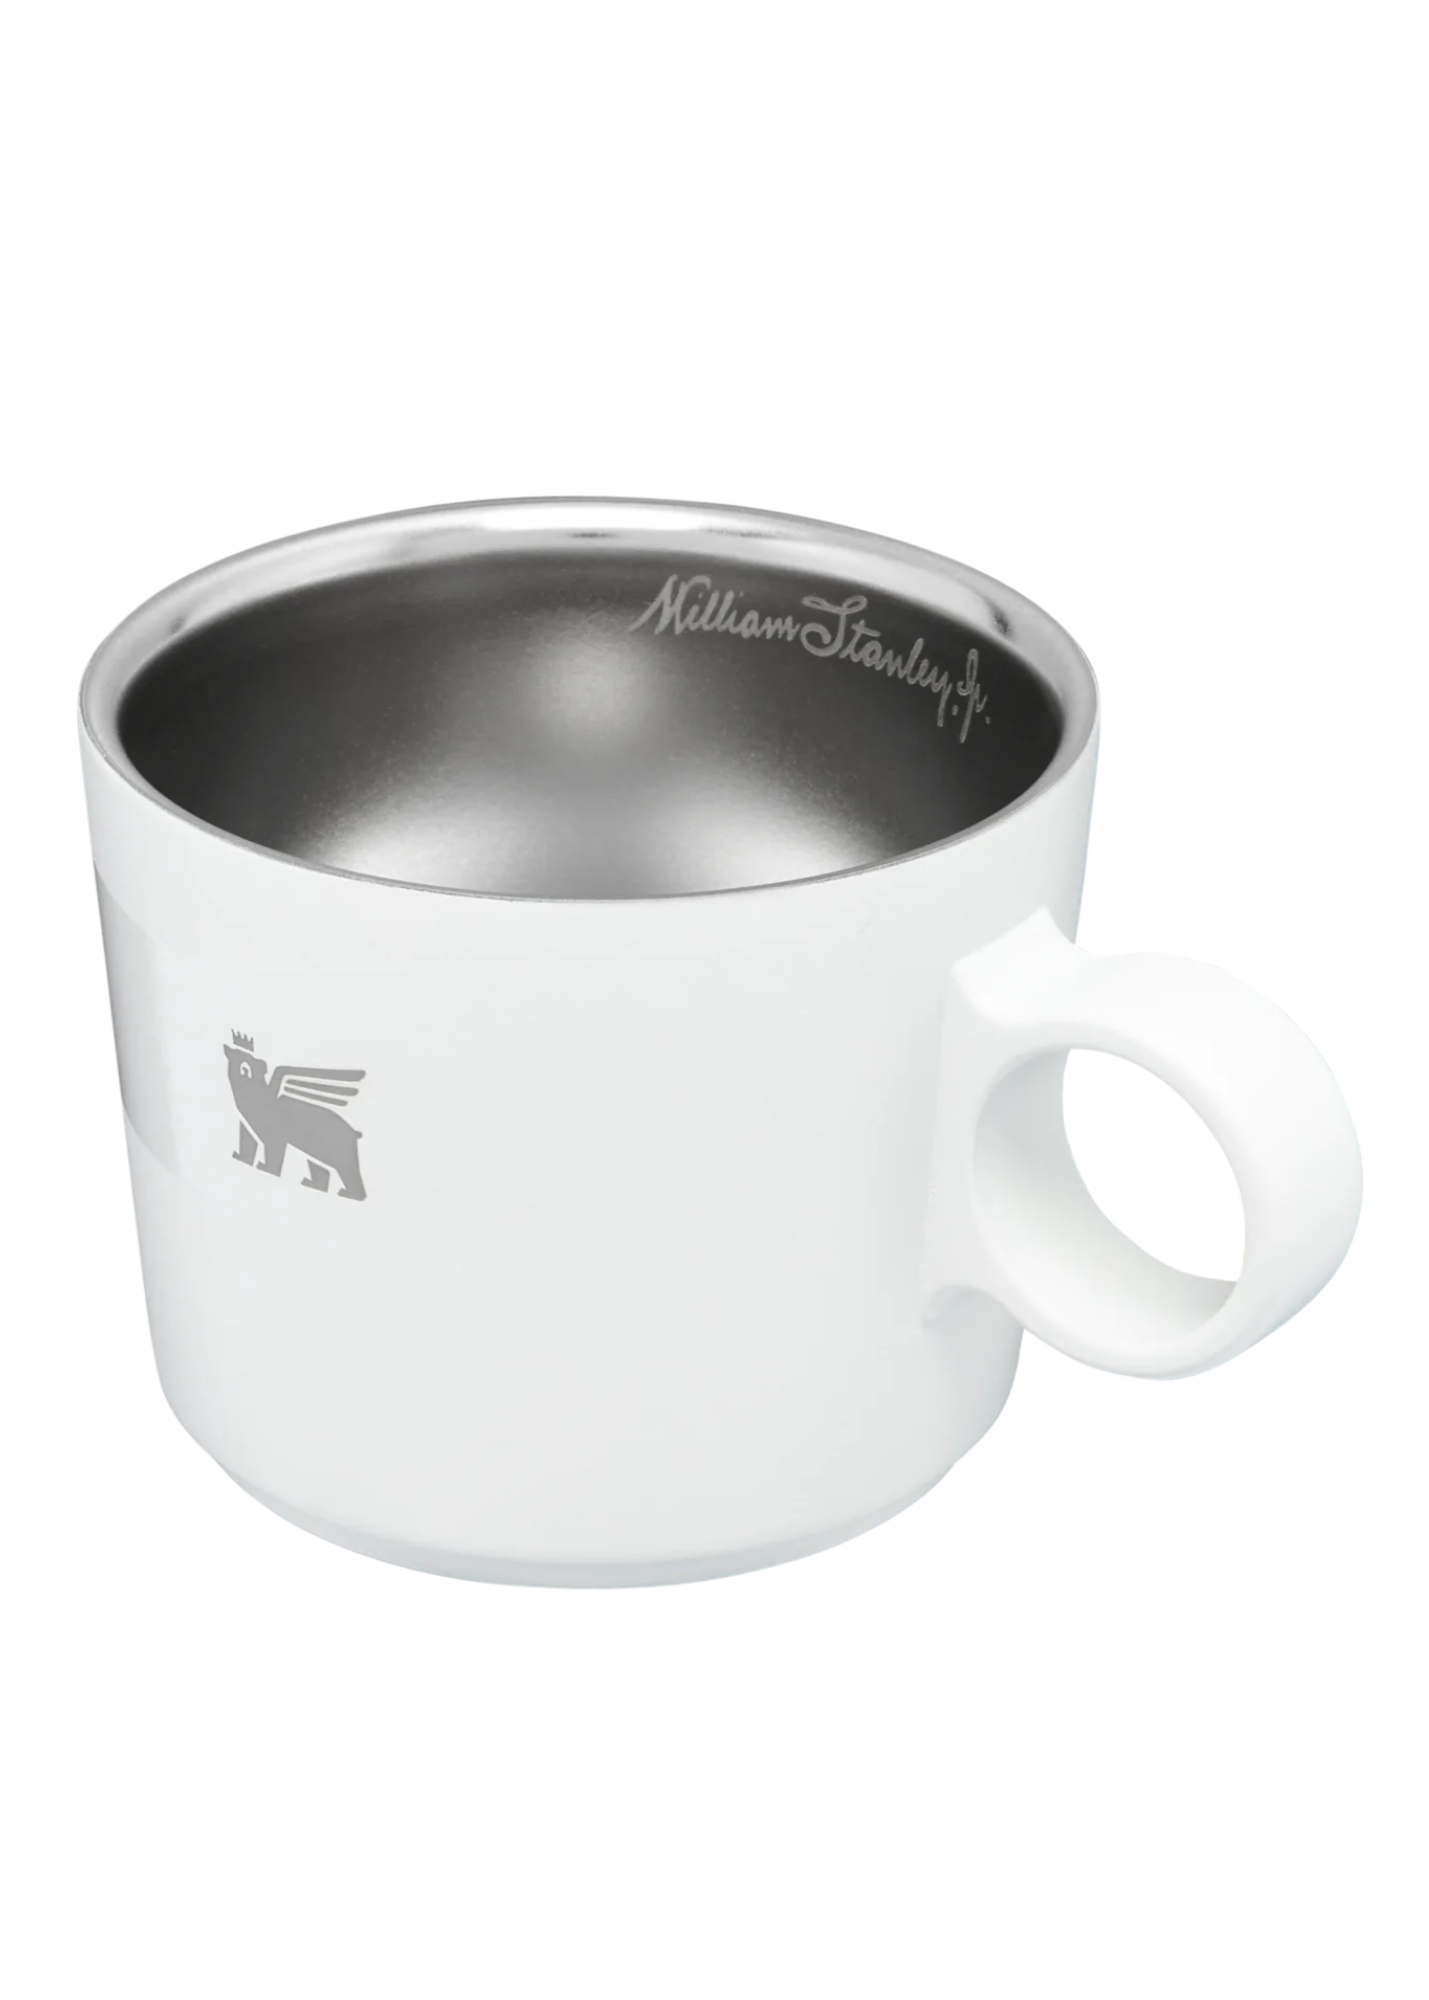 THE DAYBREAK CAPPUCCINO CUP | 6.5 OZ